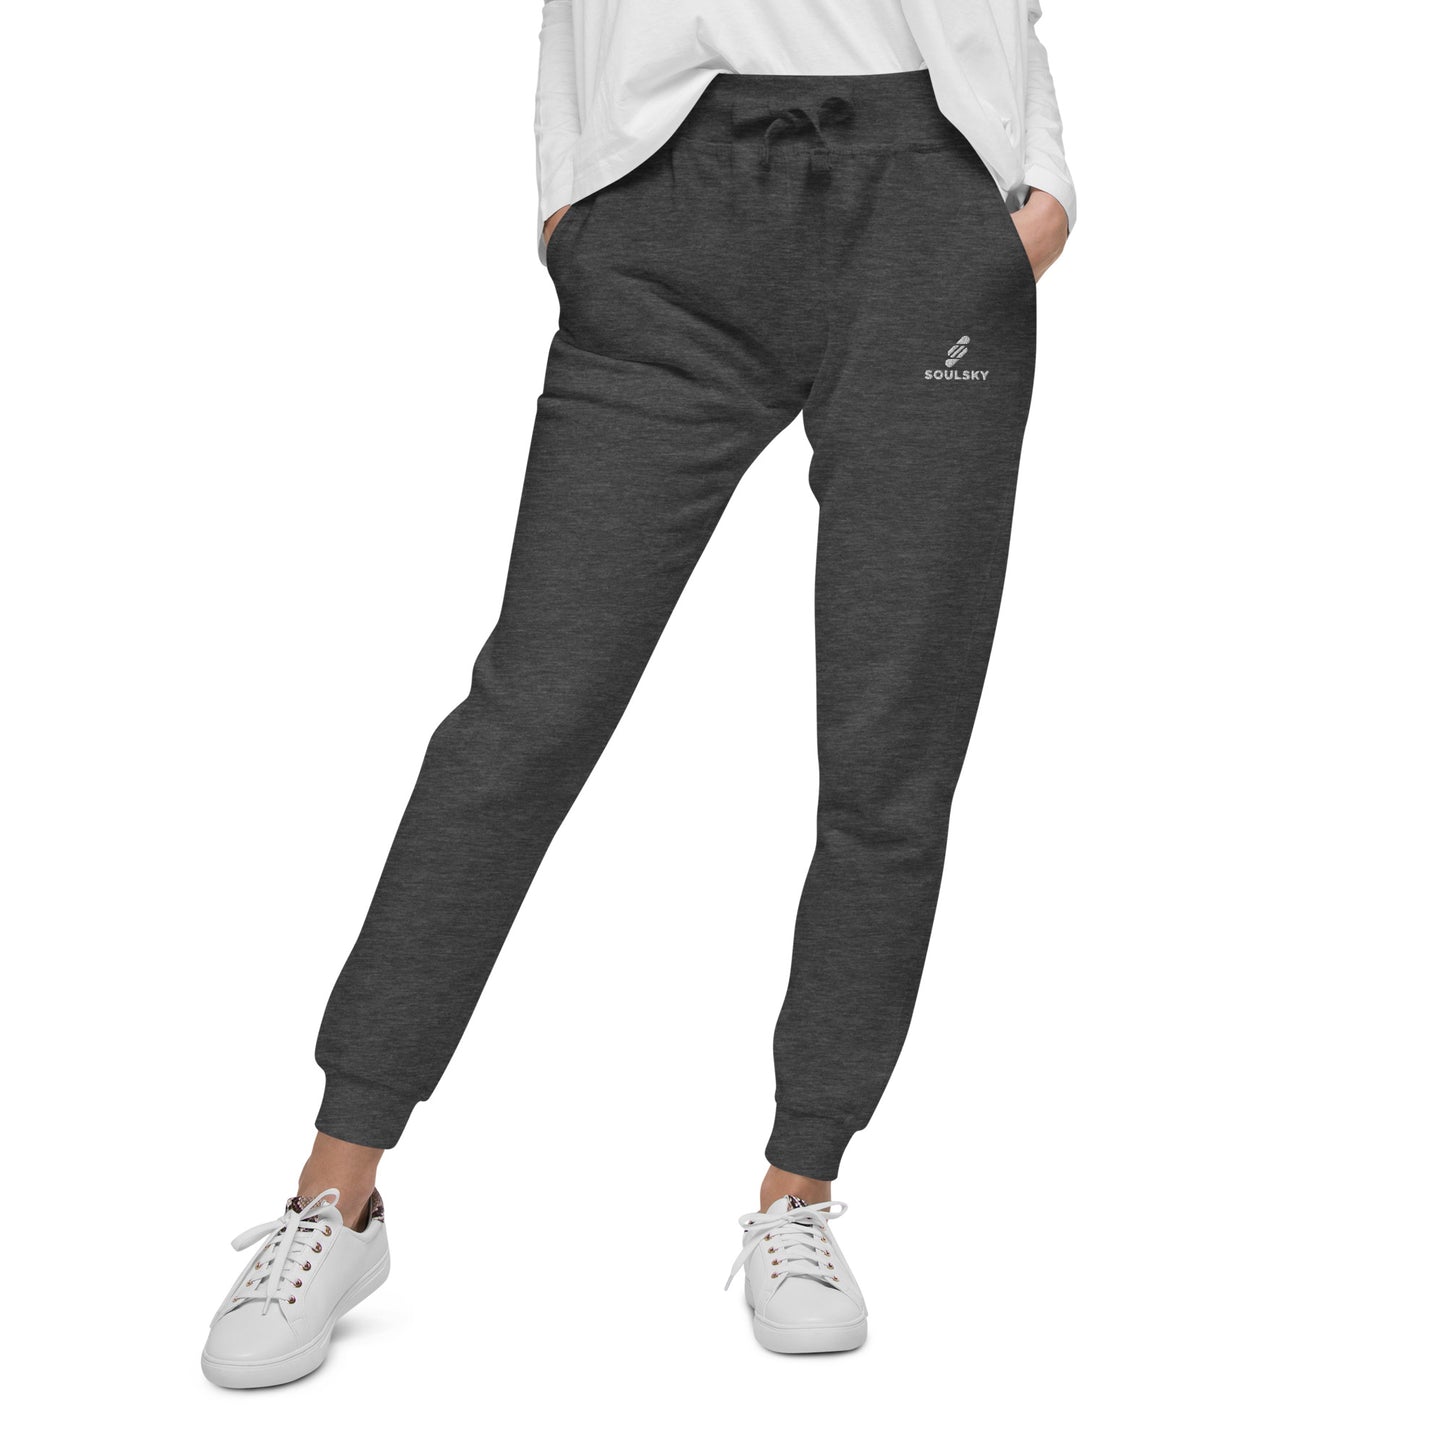 Female model wearing charcoal gray heather unisex joggers with white embroidered logo on left thigh that says "SOULSKY".